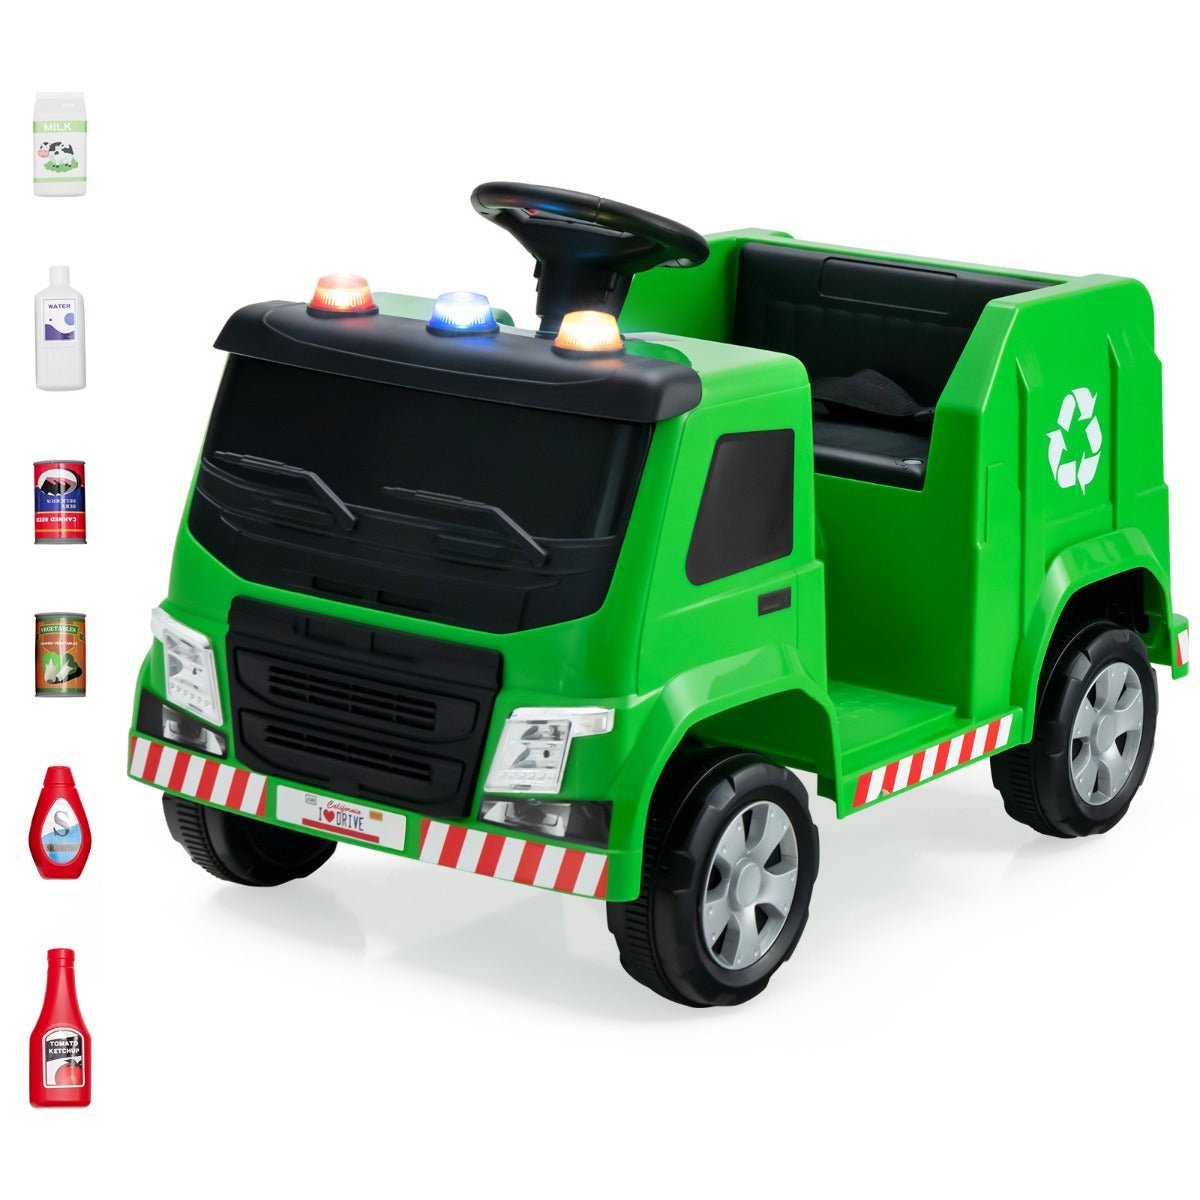 Eco-Friendly Fun: 12V Kids Ride On Garbage Truck with Remote Control, Green